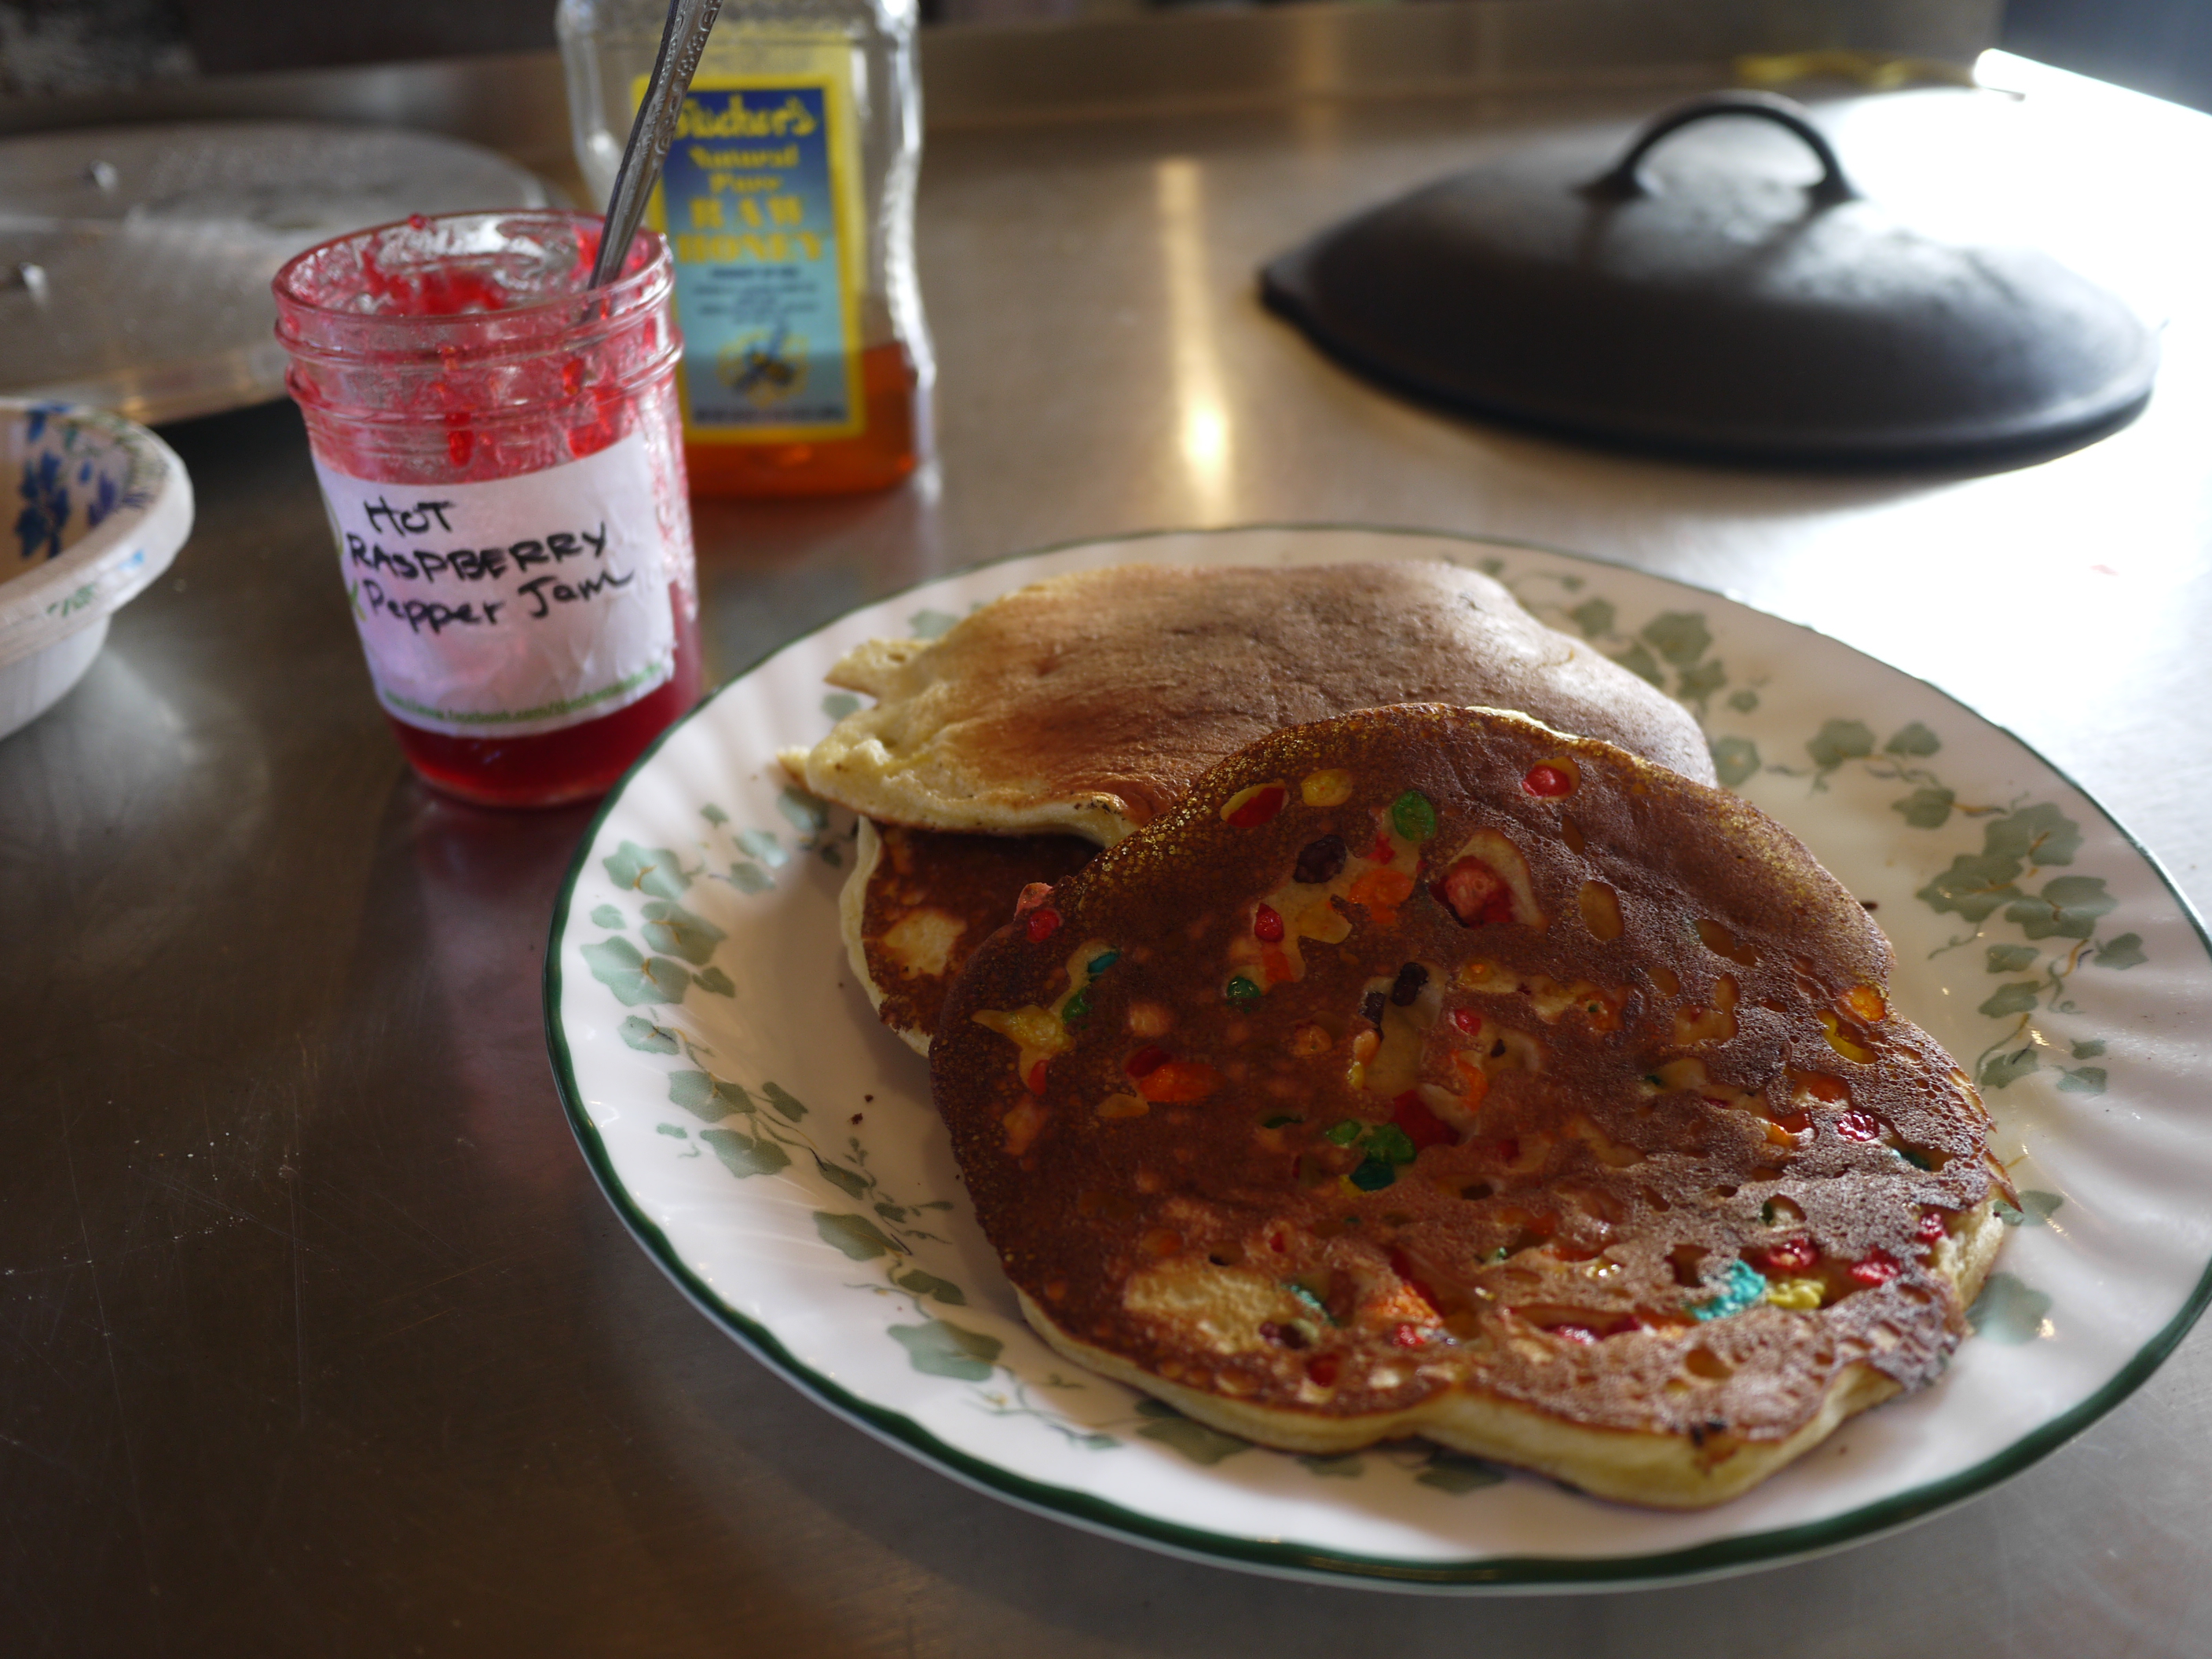 Fruity Pebble pancakes with spicy jam